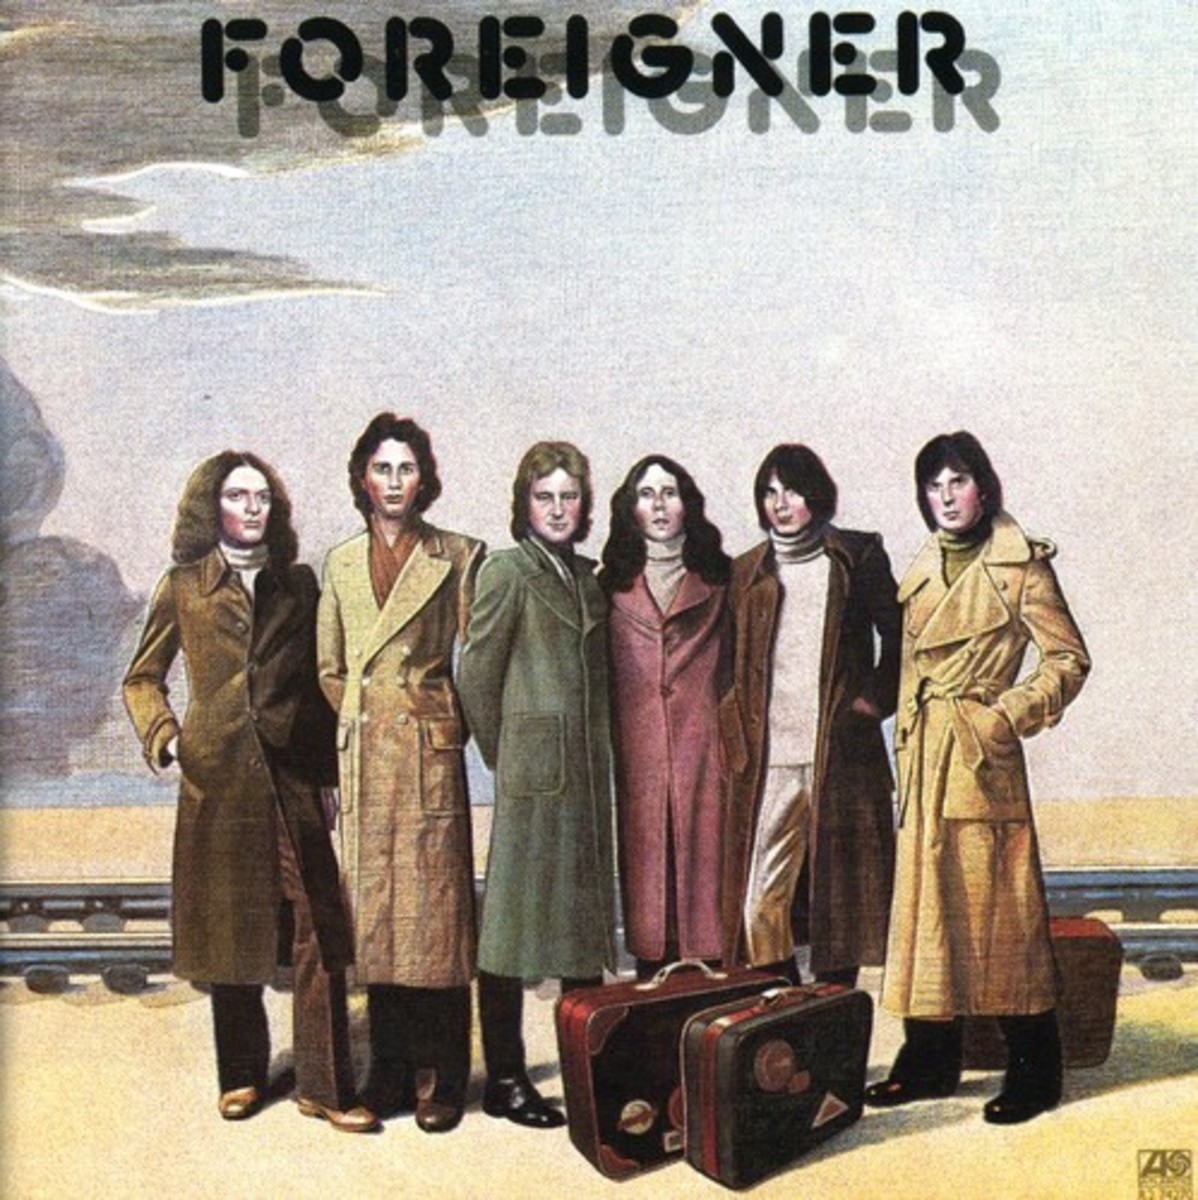 The self-titled Foreigner album has hits such as "Cold As Ice" and "Feels Like the First Time."